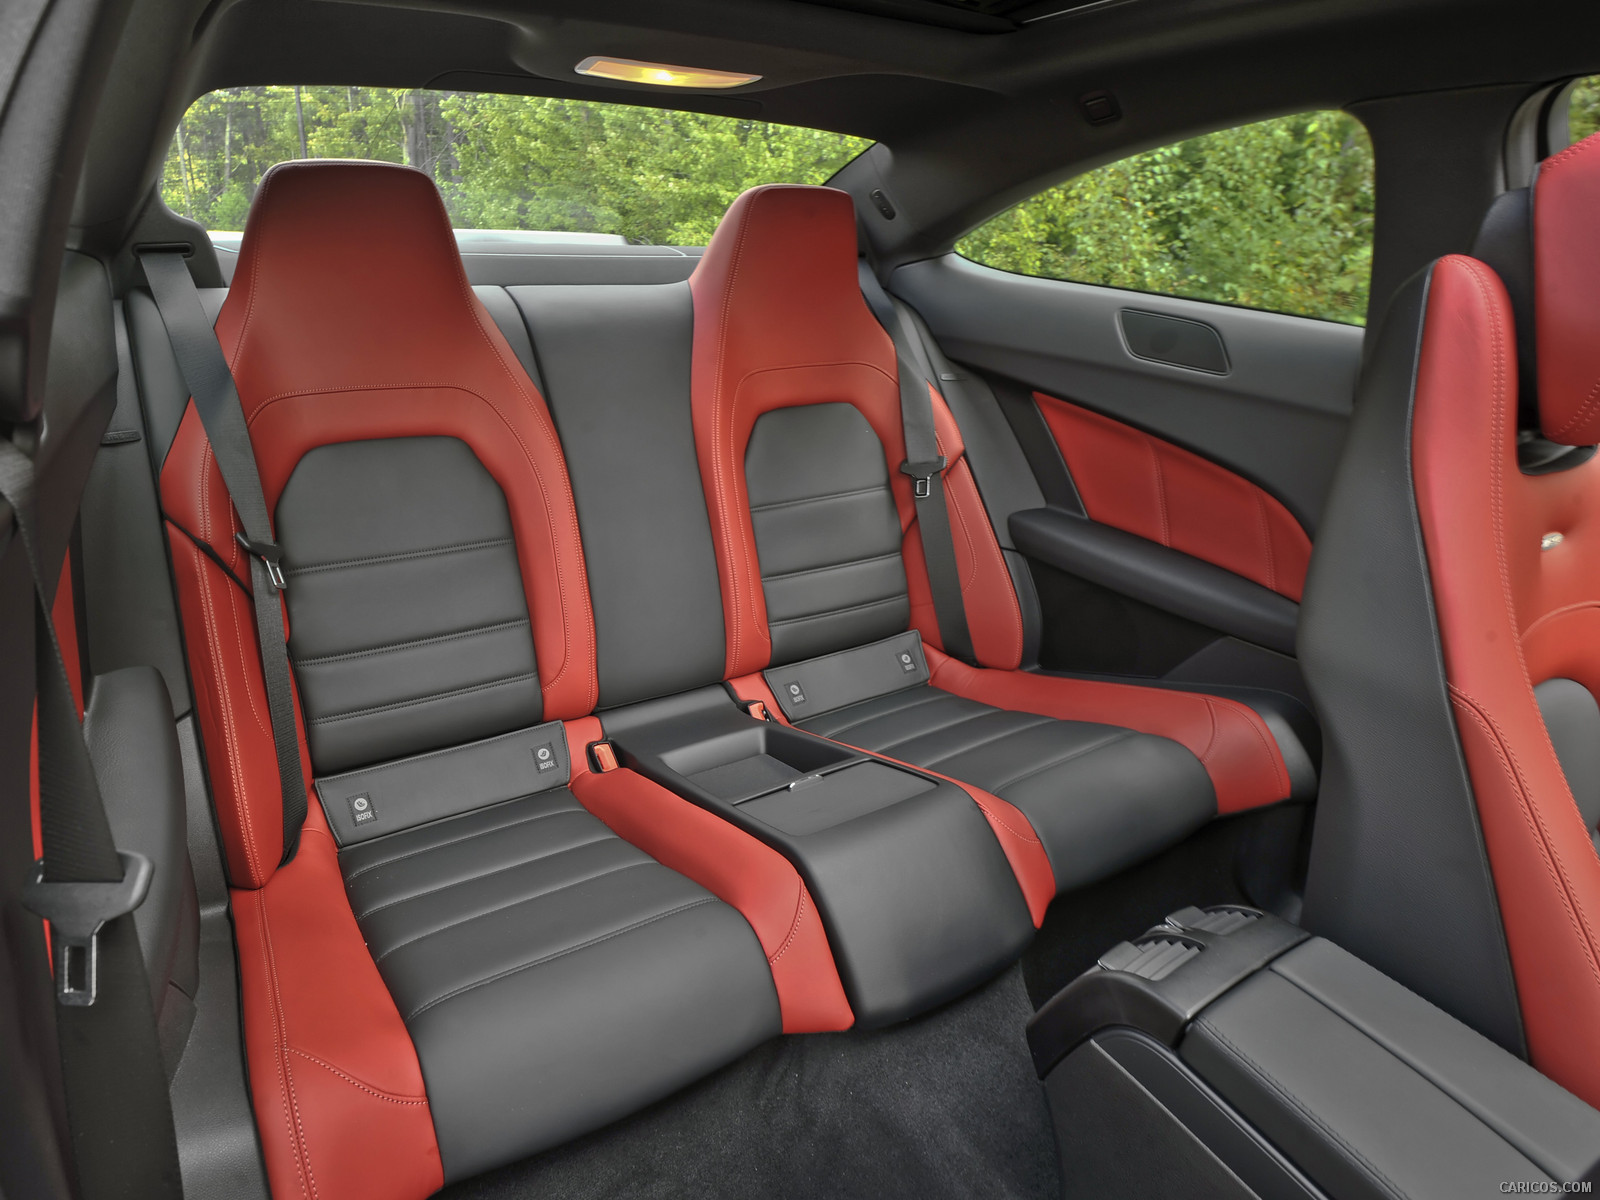 Mercedes-Benz C63 AMG Coupe (2012)  - Interior Rear Seats, #27 of 64